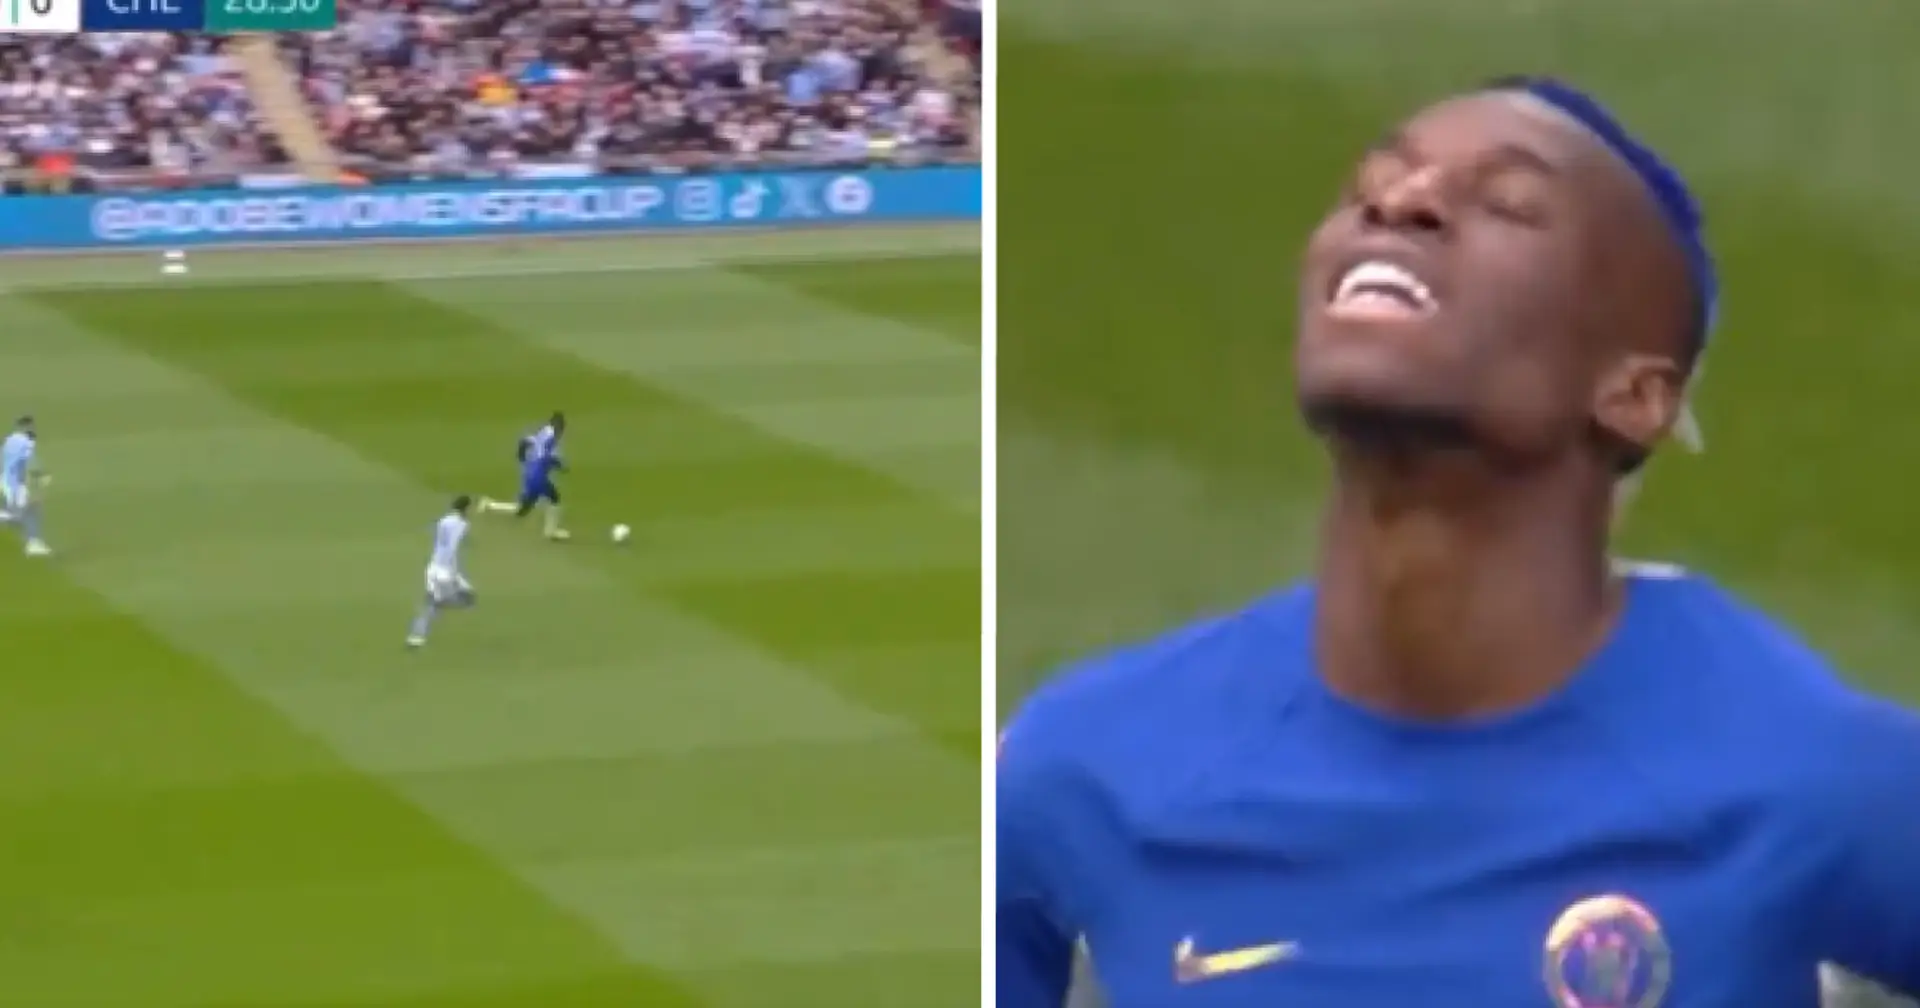 'Oh f**** off': Fan can't believe his eyes after seeing NEW angle of Jackson's big miss v Man City